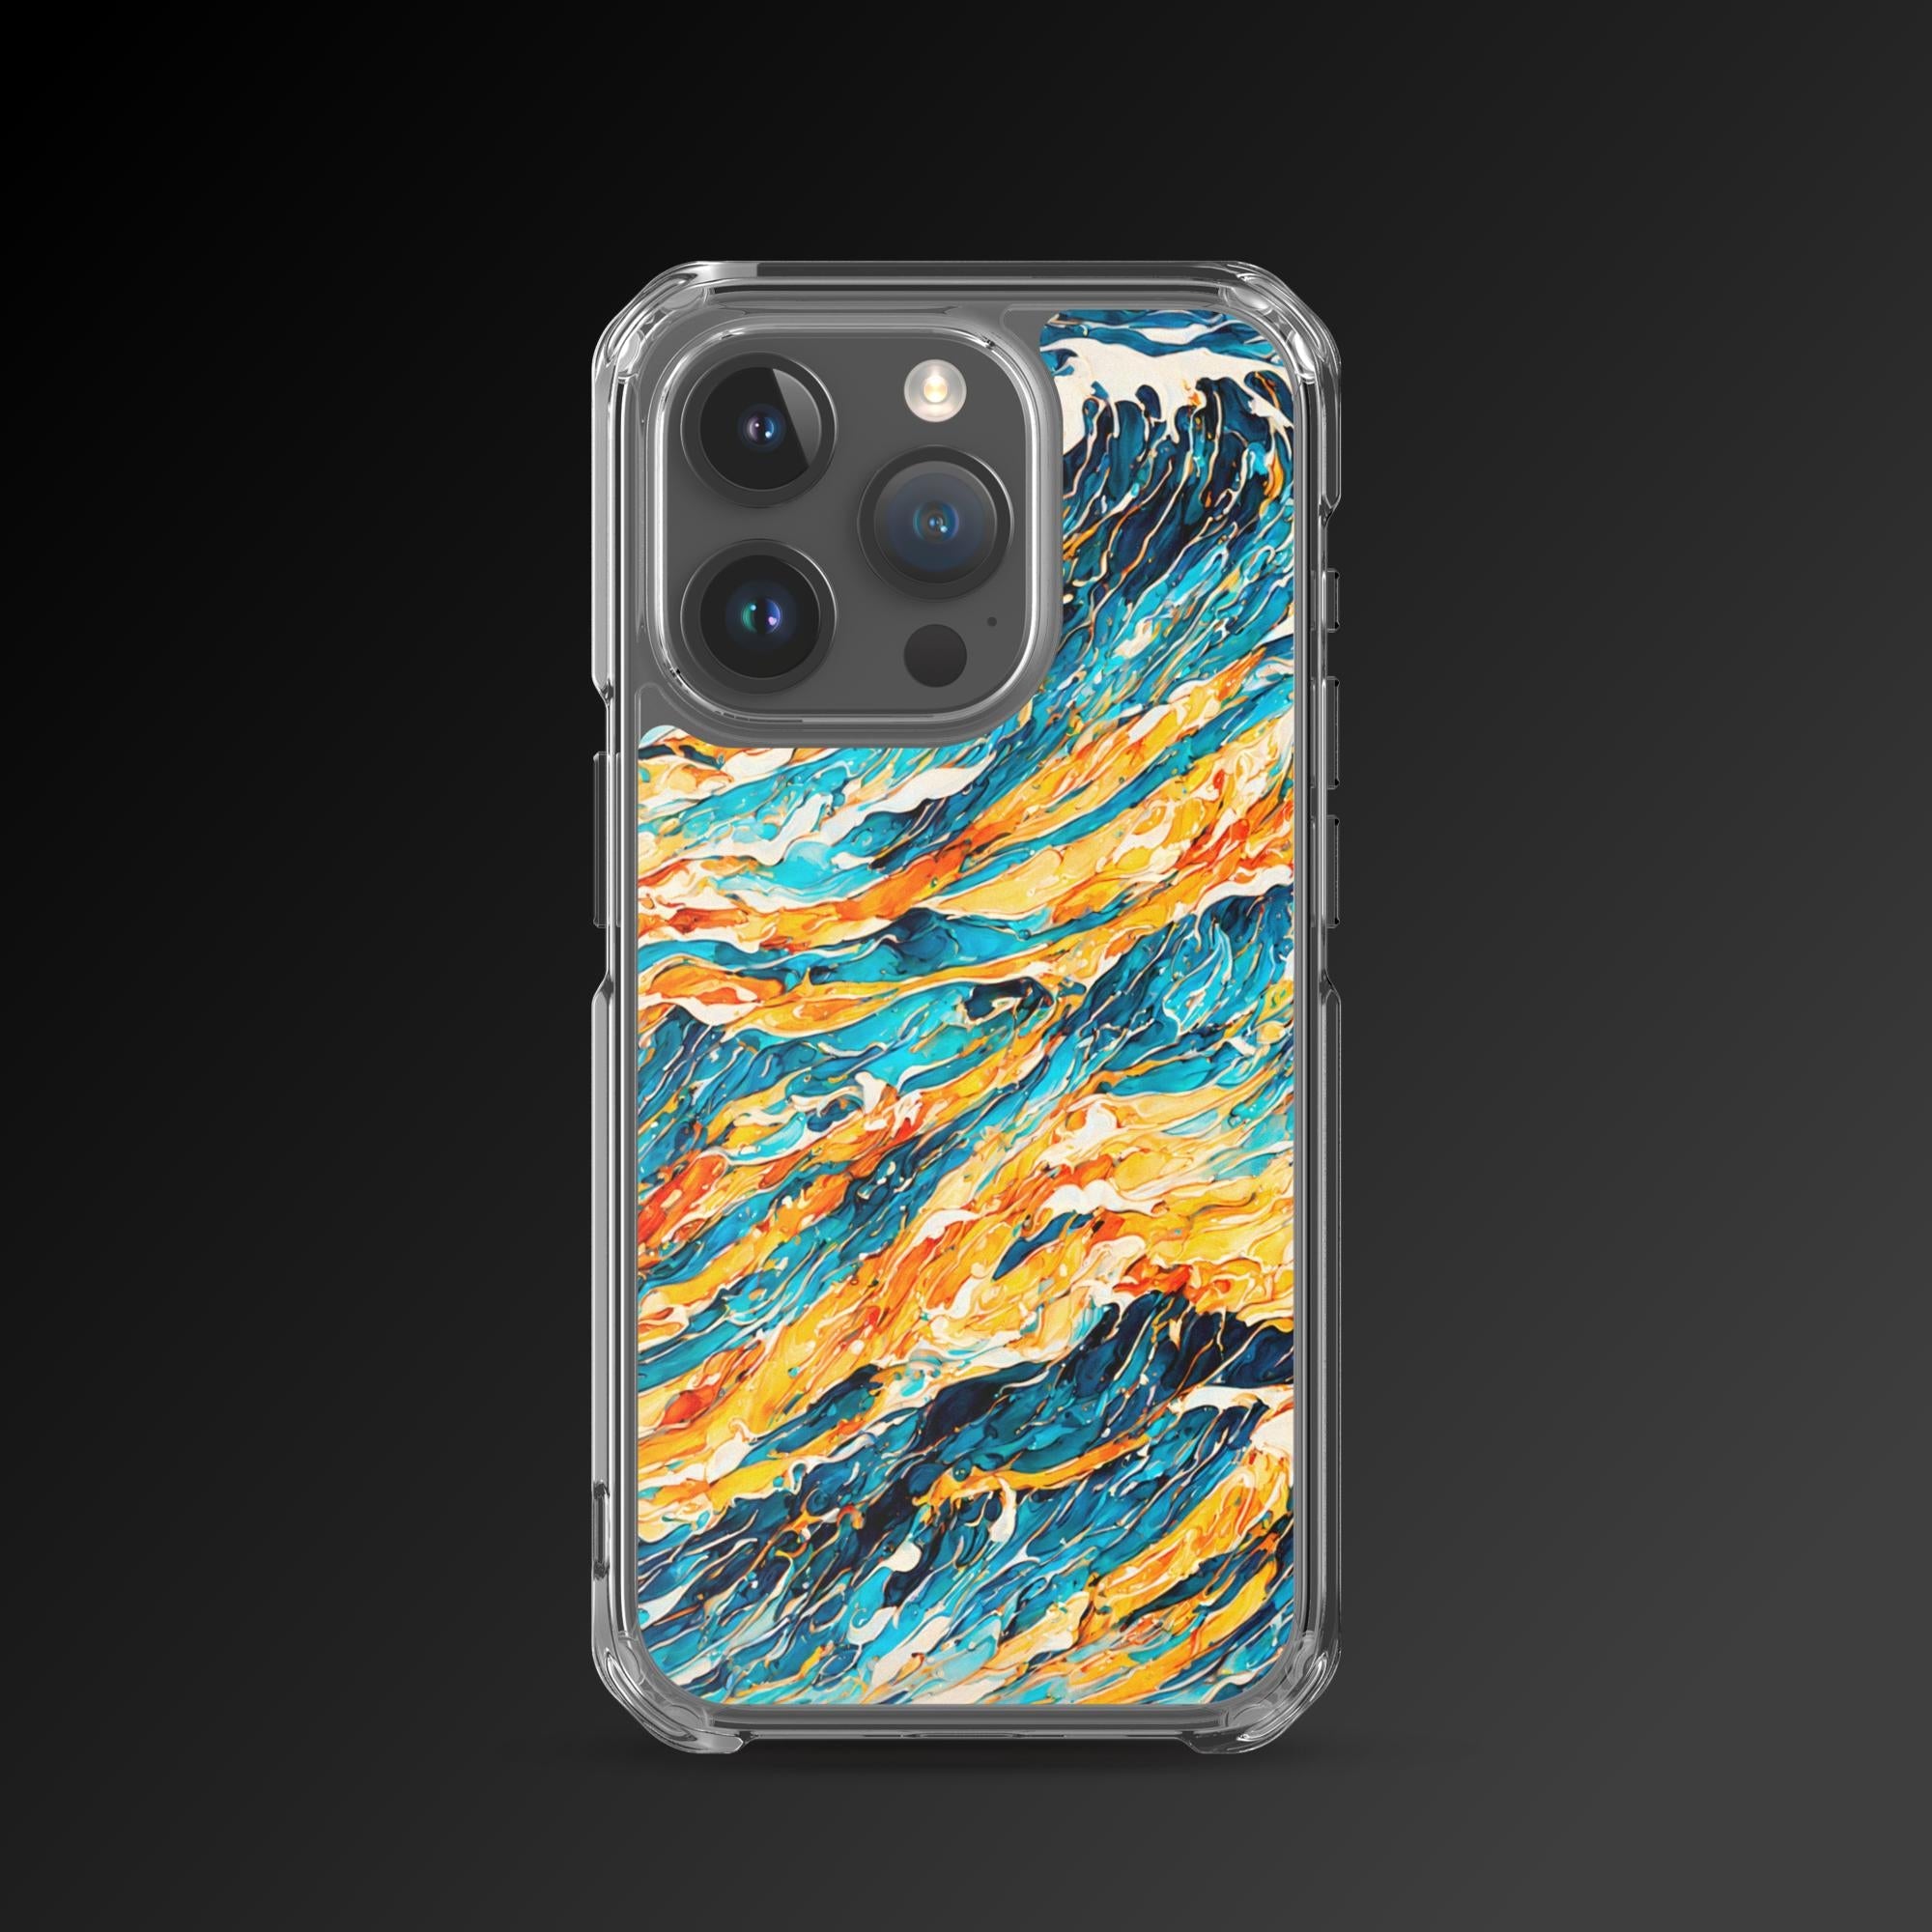 "Bottomless emotions" clear iphone case - Clear iphone case - Ever colorful